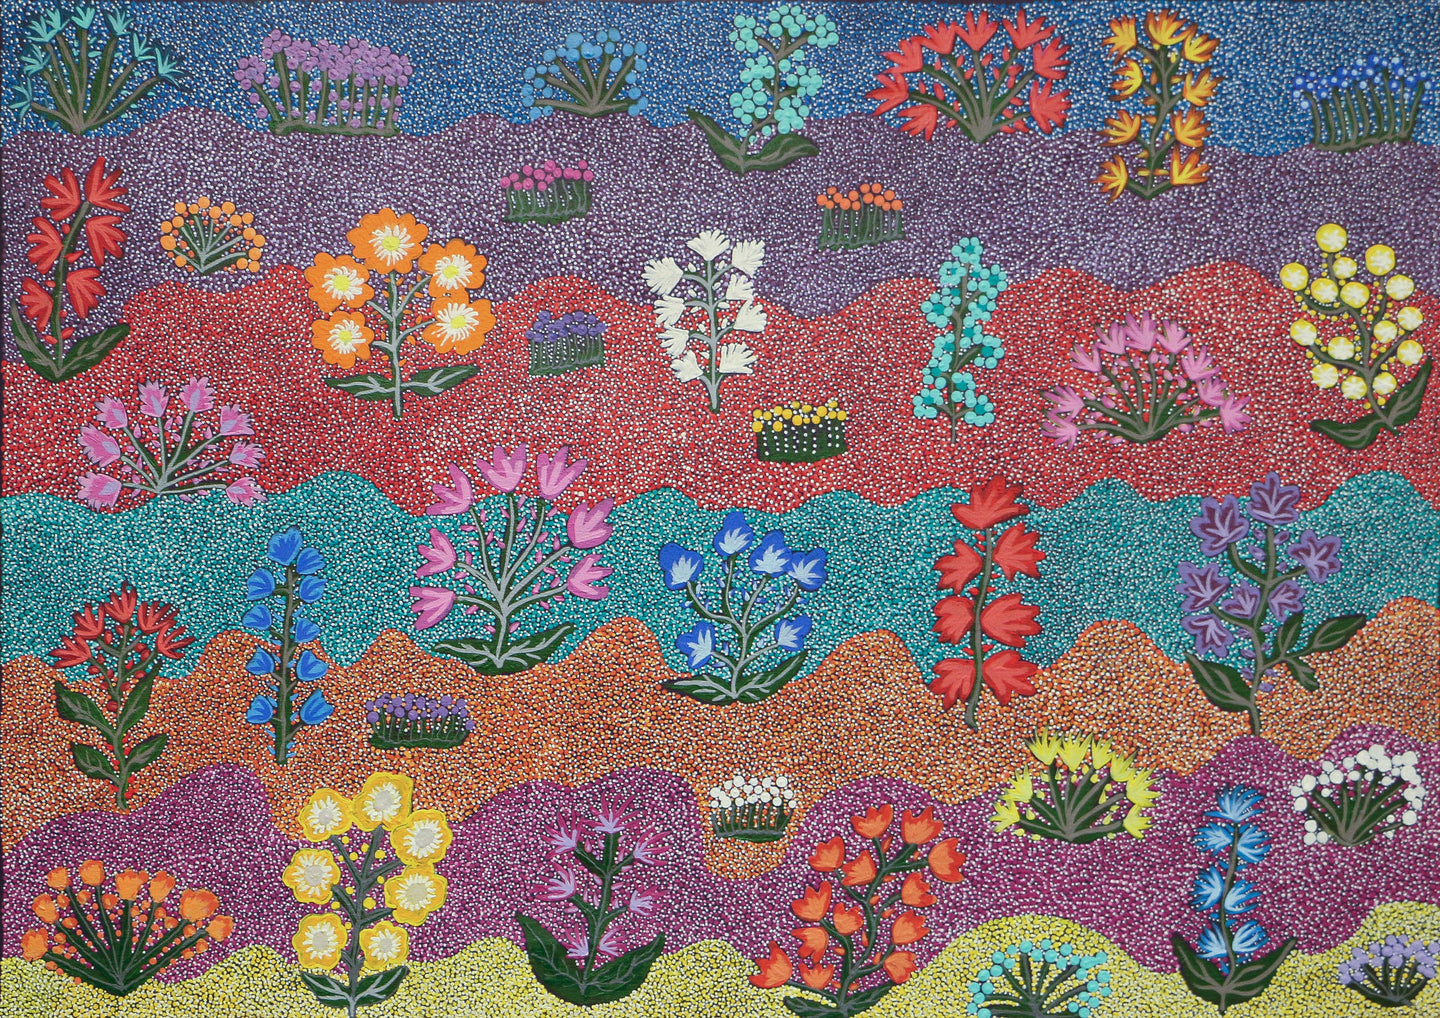 Bush Medicine and Wildflowers in My Country, 107x76 cm